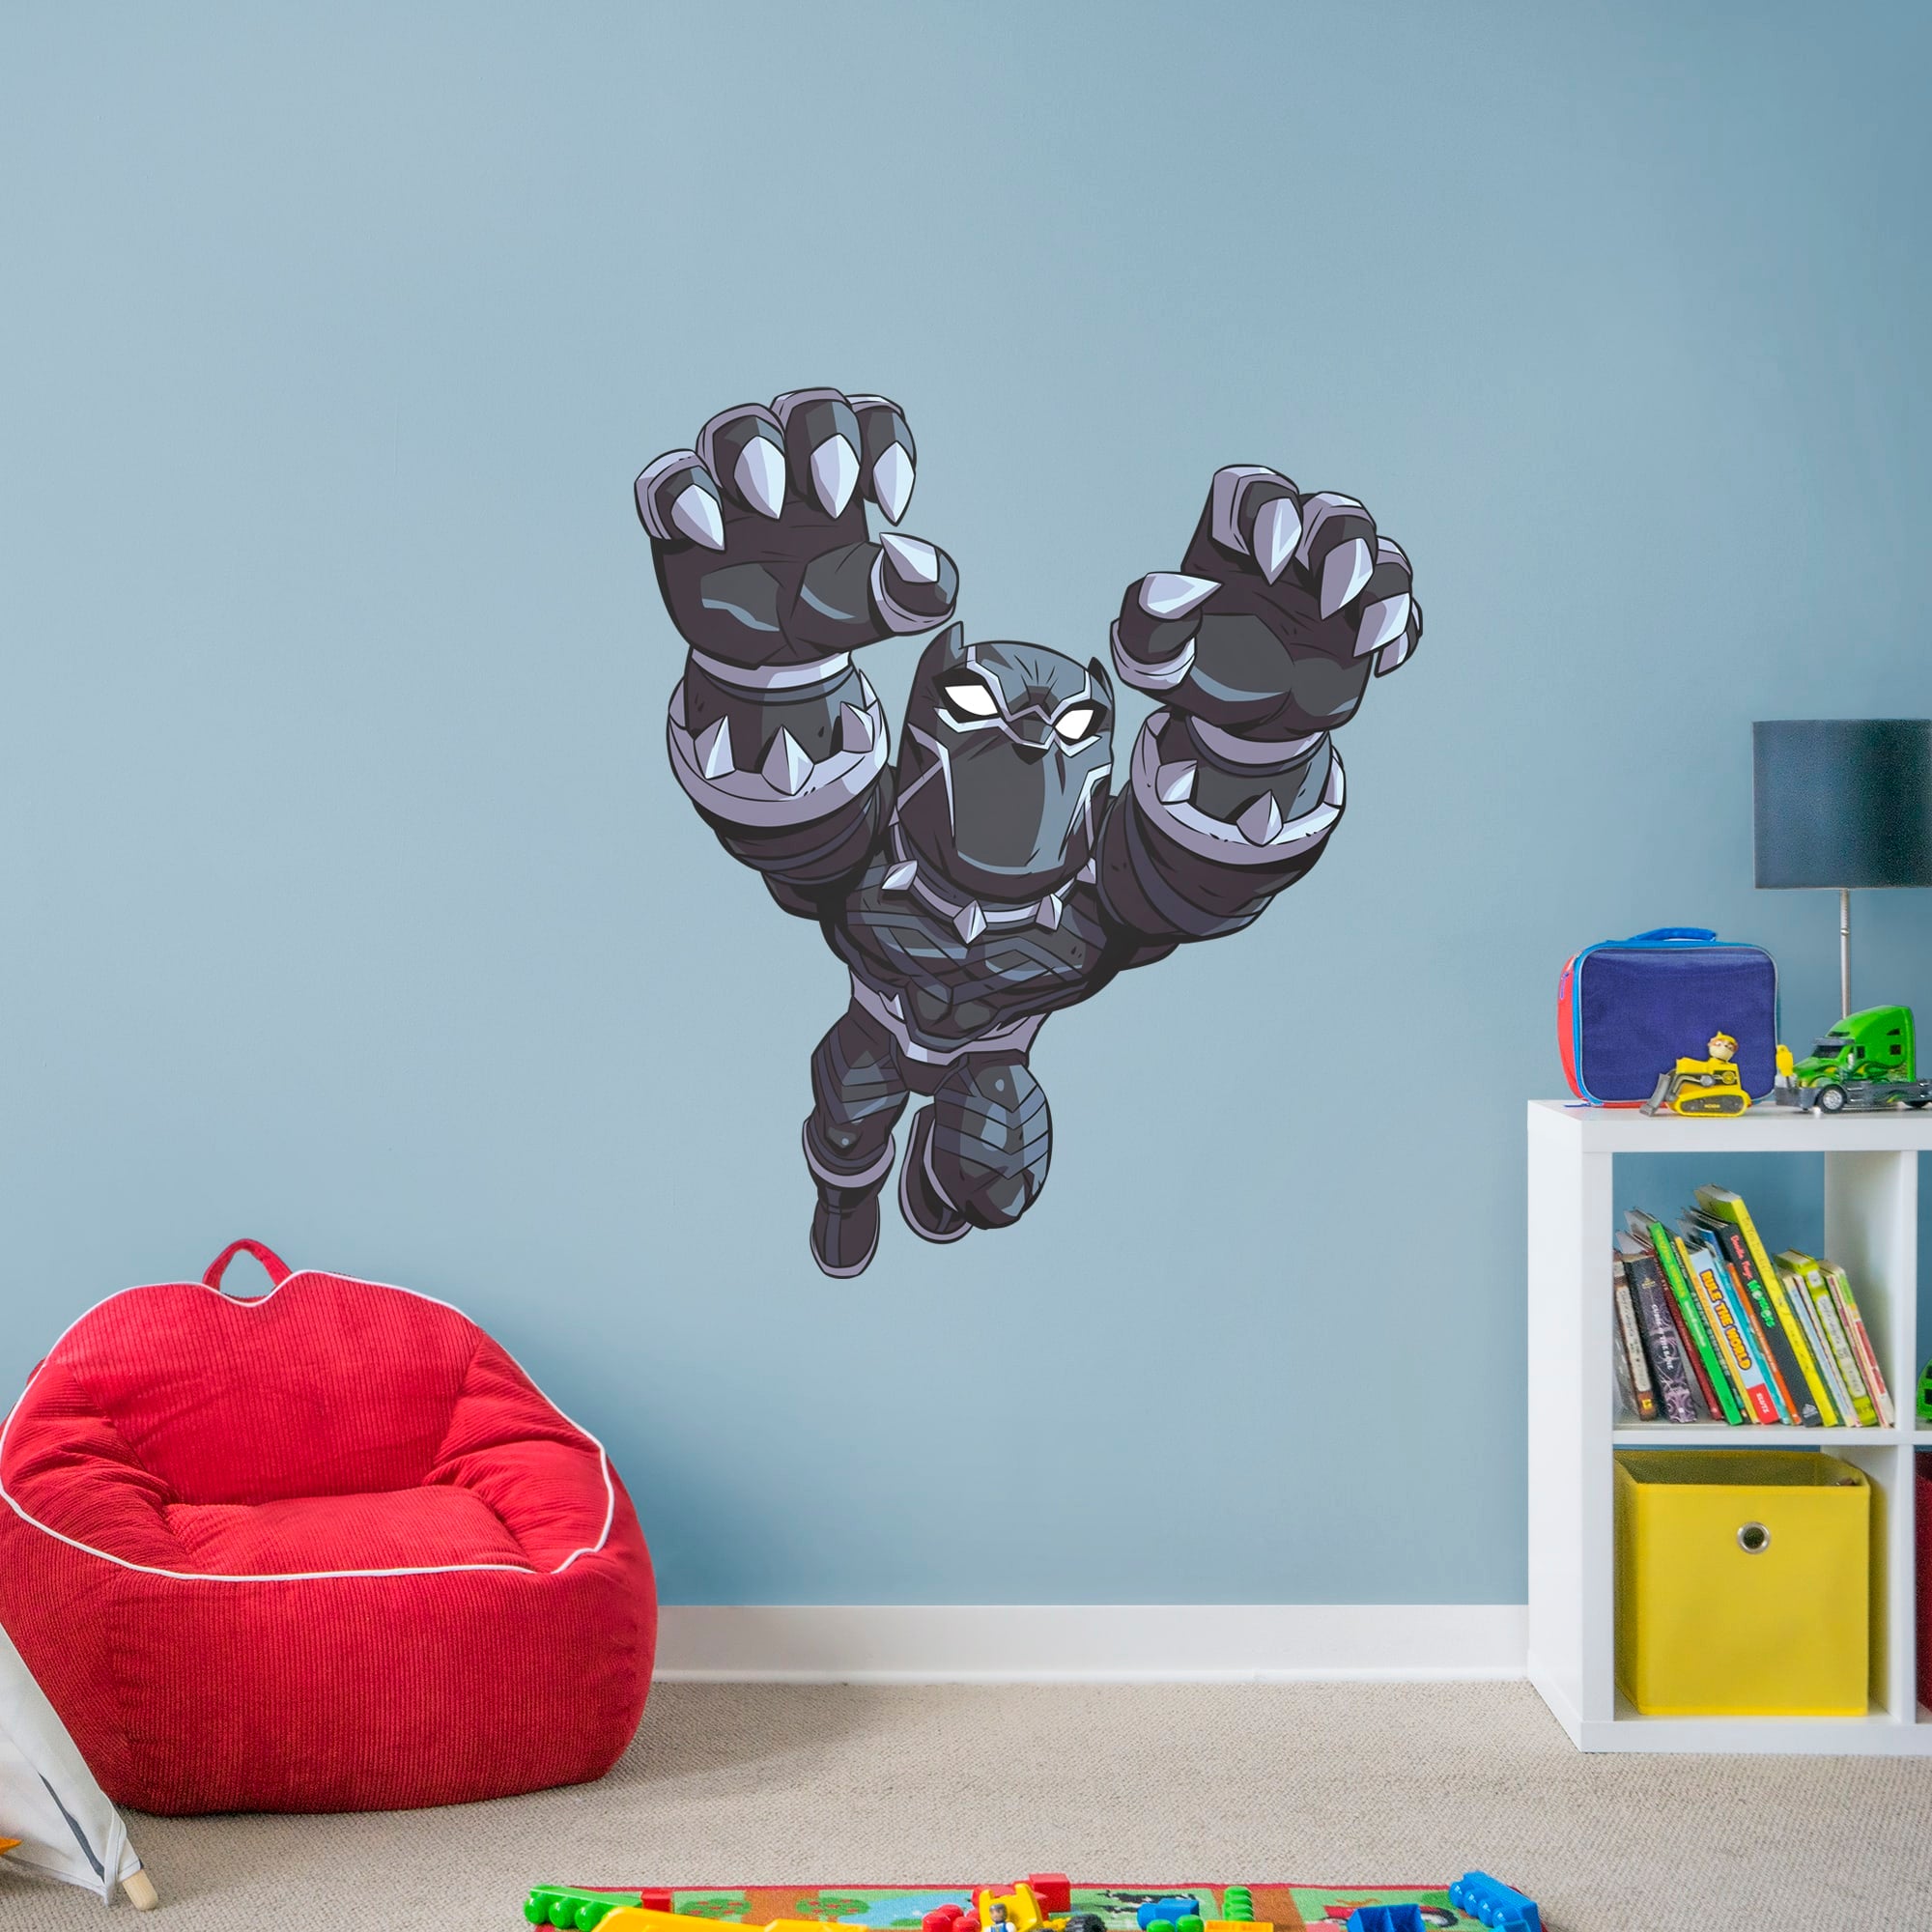 Black Panther: Marvel Super Hero Adventures - Officially Licensed Removable Wall Decal 40.0"W x 44.0"H by Fathead | Vinyl